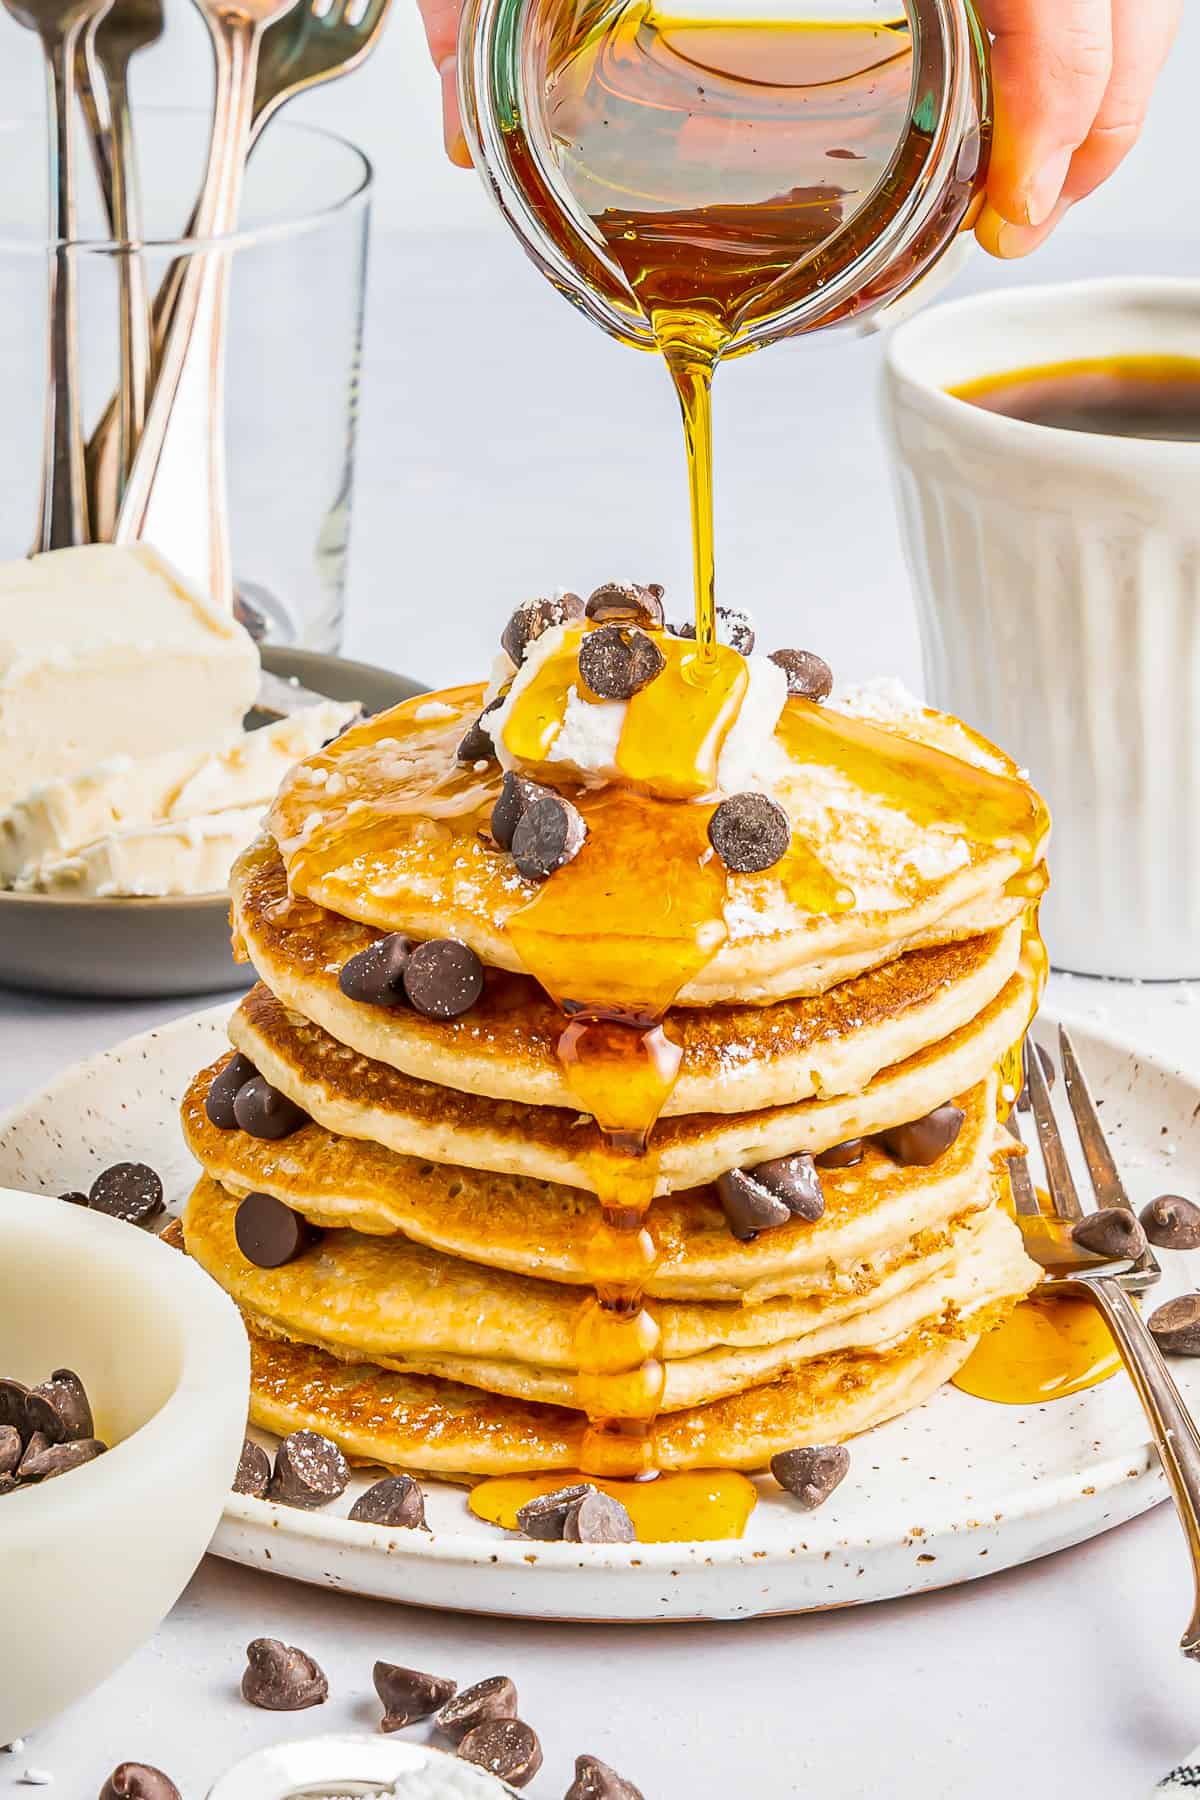 syrup poured over a tall stack of gluten free pancakes on a white plate with chocolate chips and whipped cream.